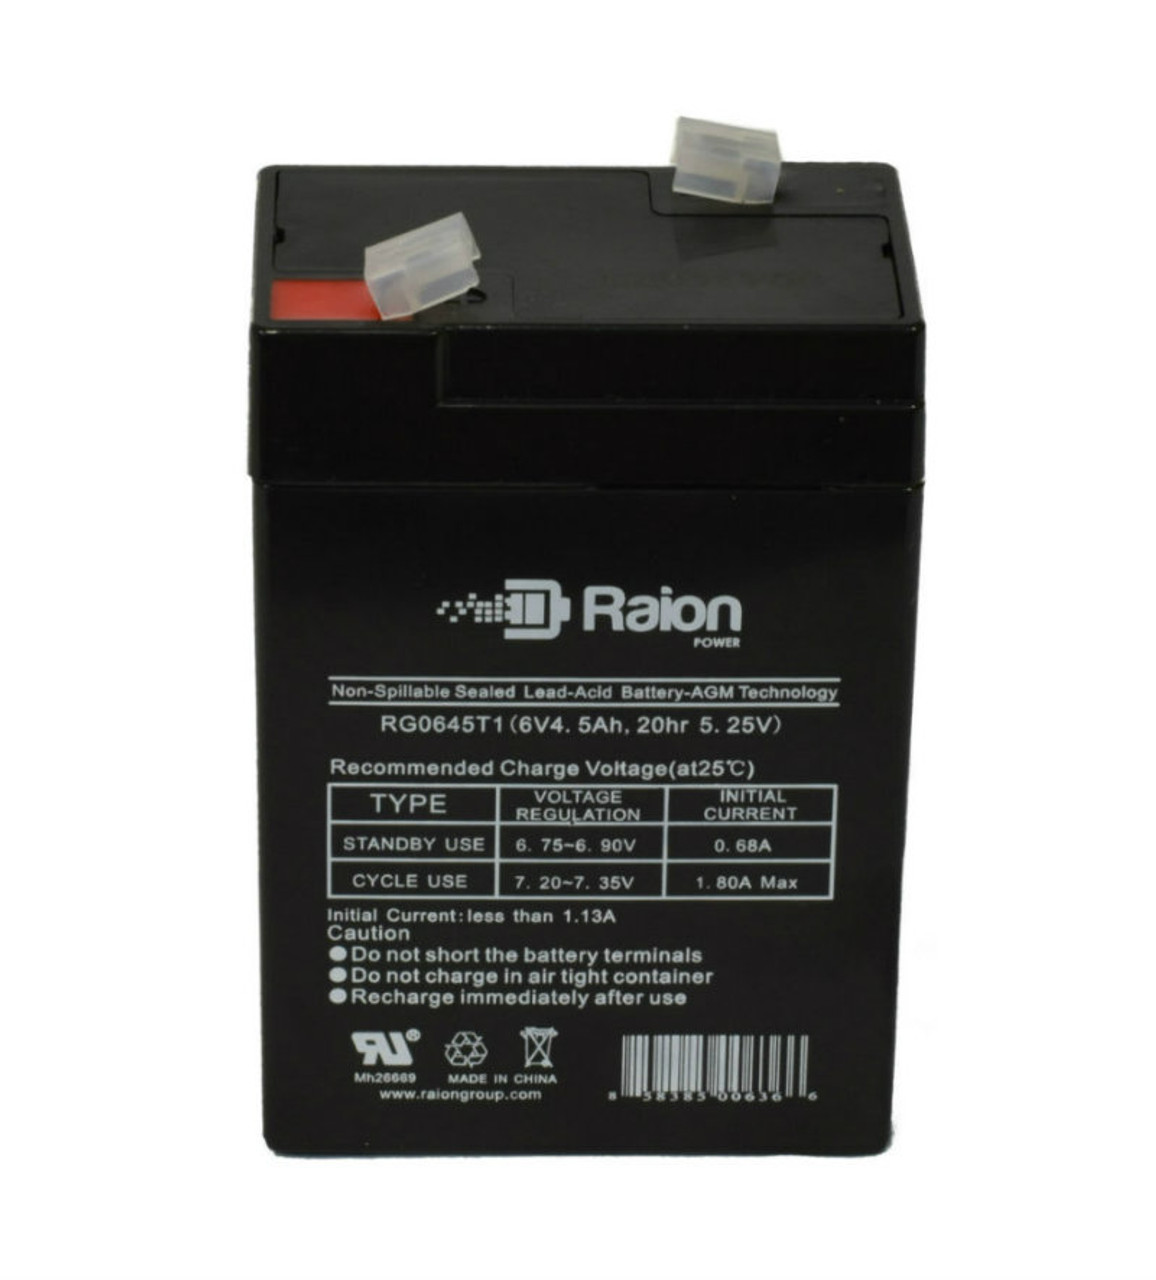 Raion Power RG0645T1 Replacement Battery Cartridge for Weiboer GB6-4